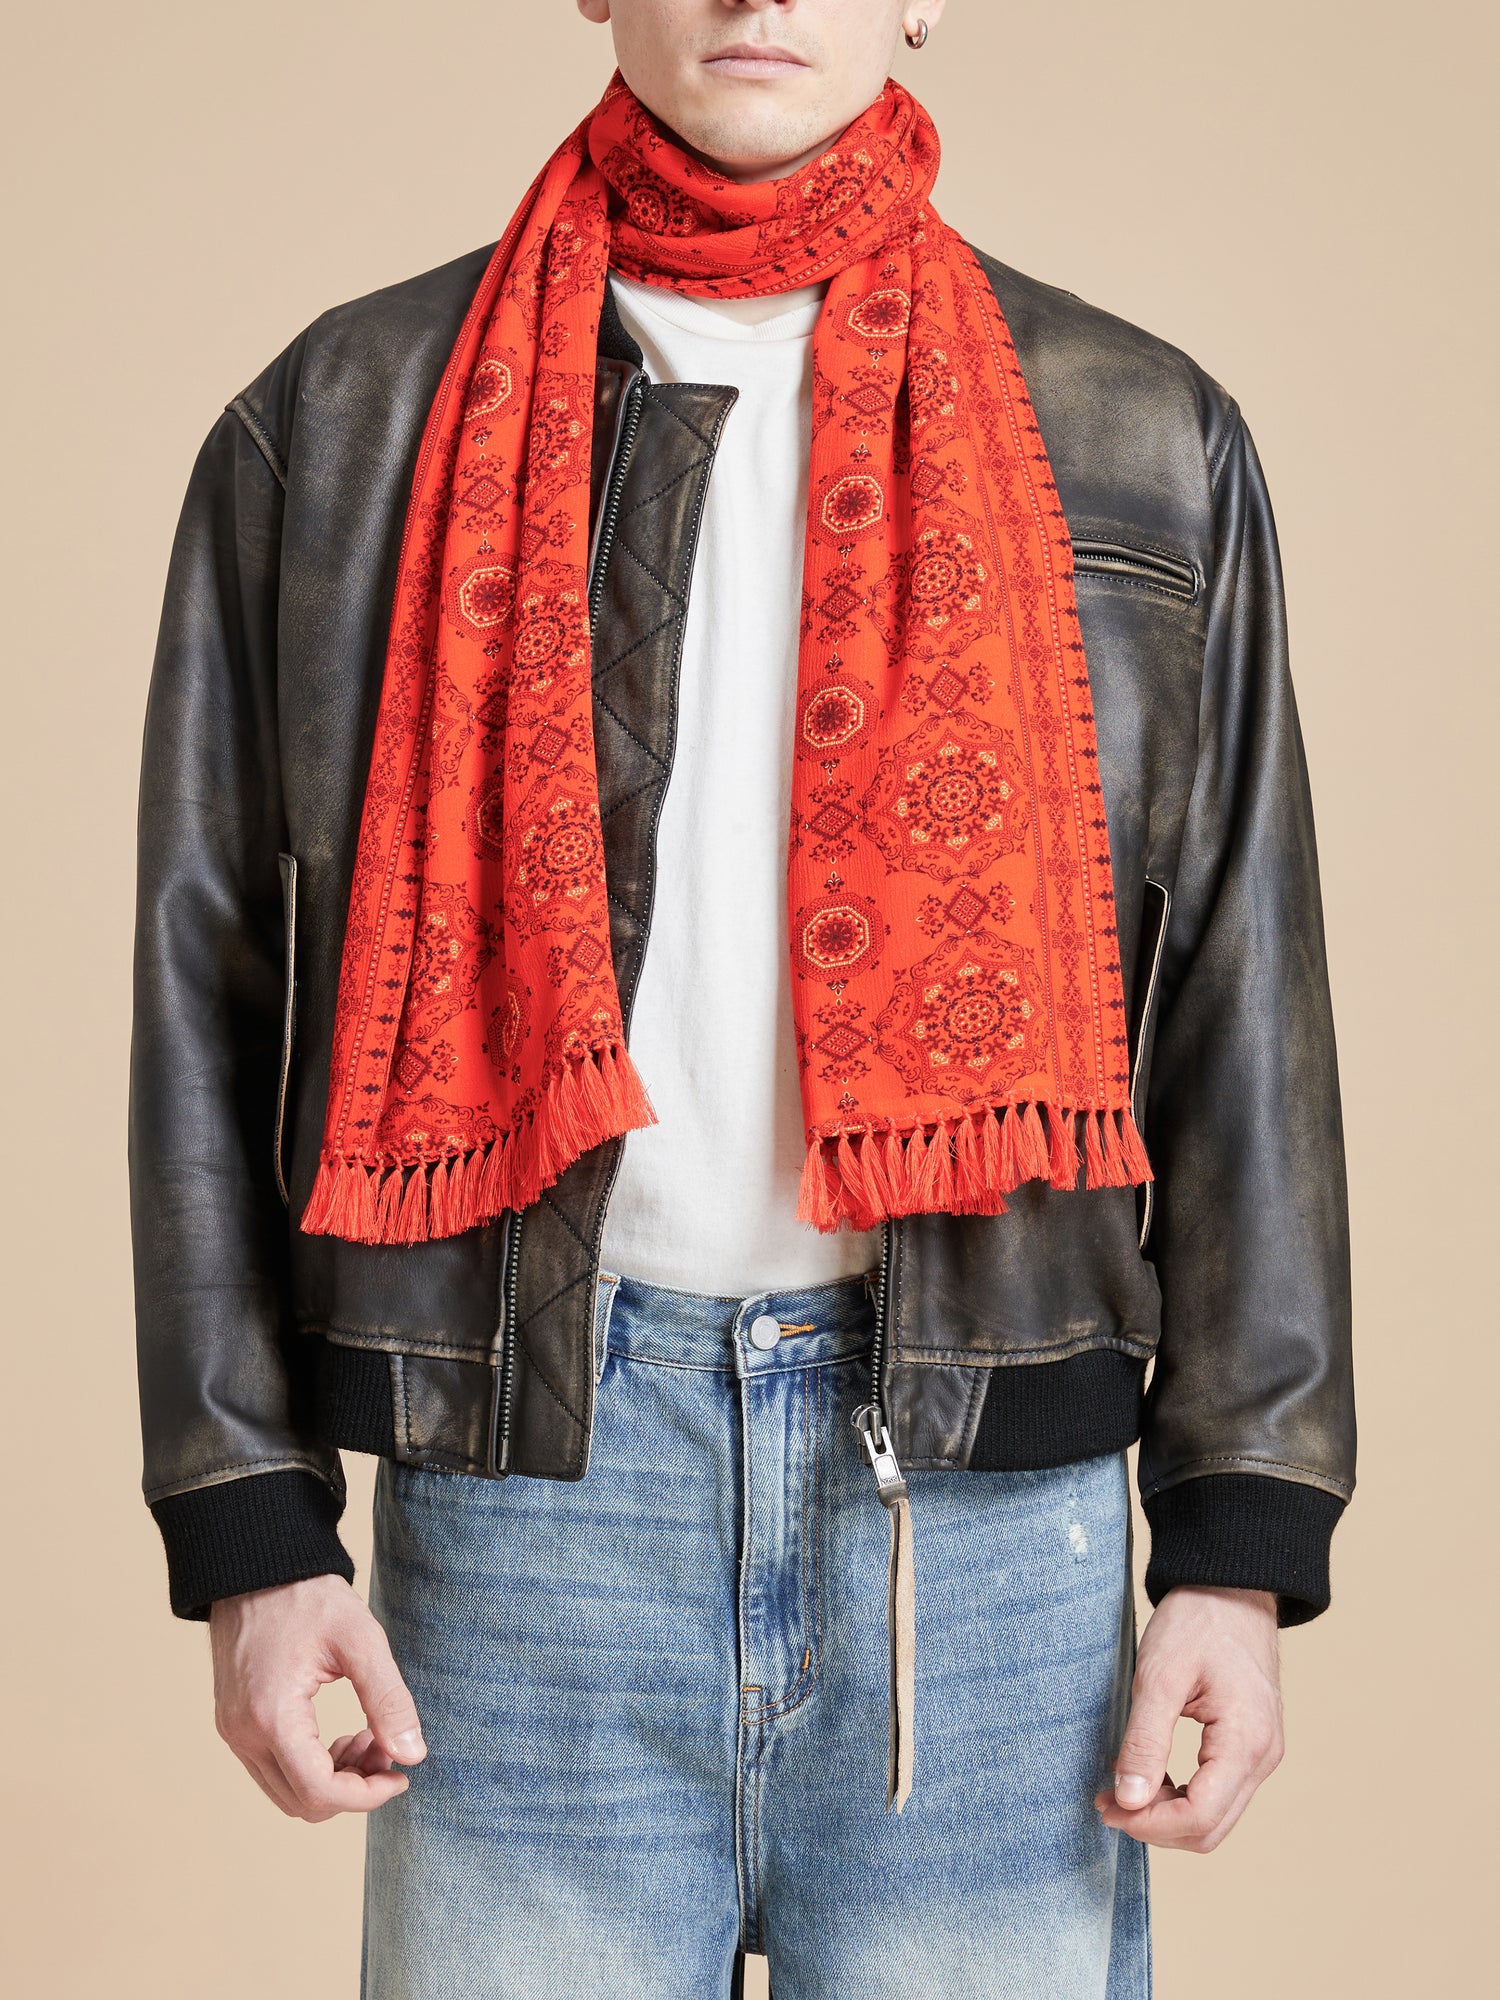 A man wearing a Grenadine Scarf by Found with hand tied tassels.